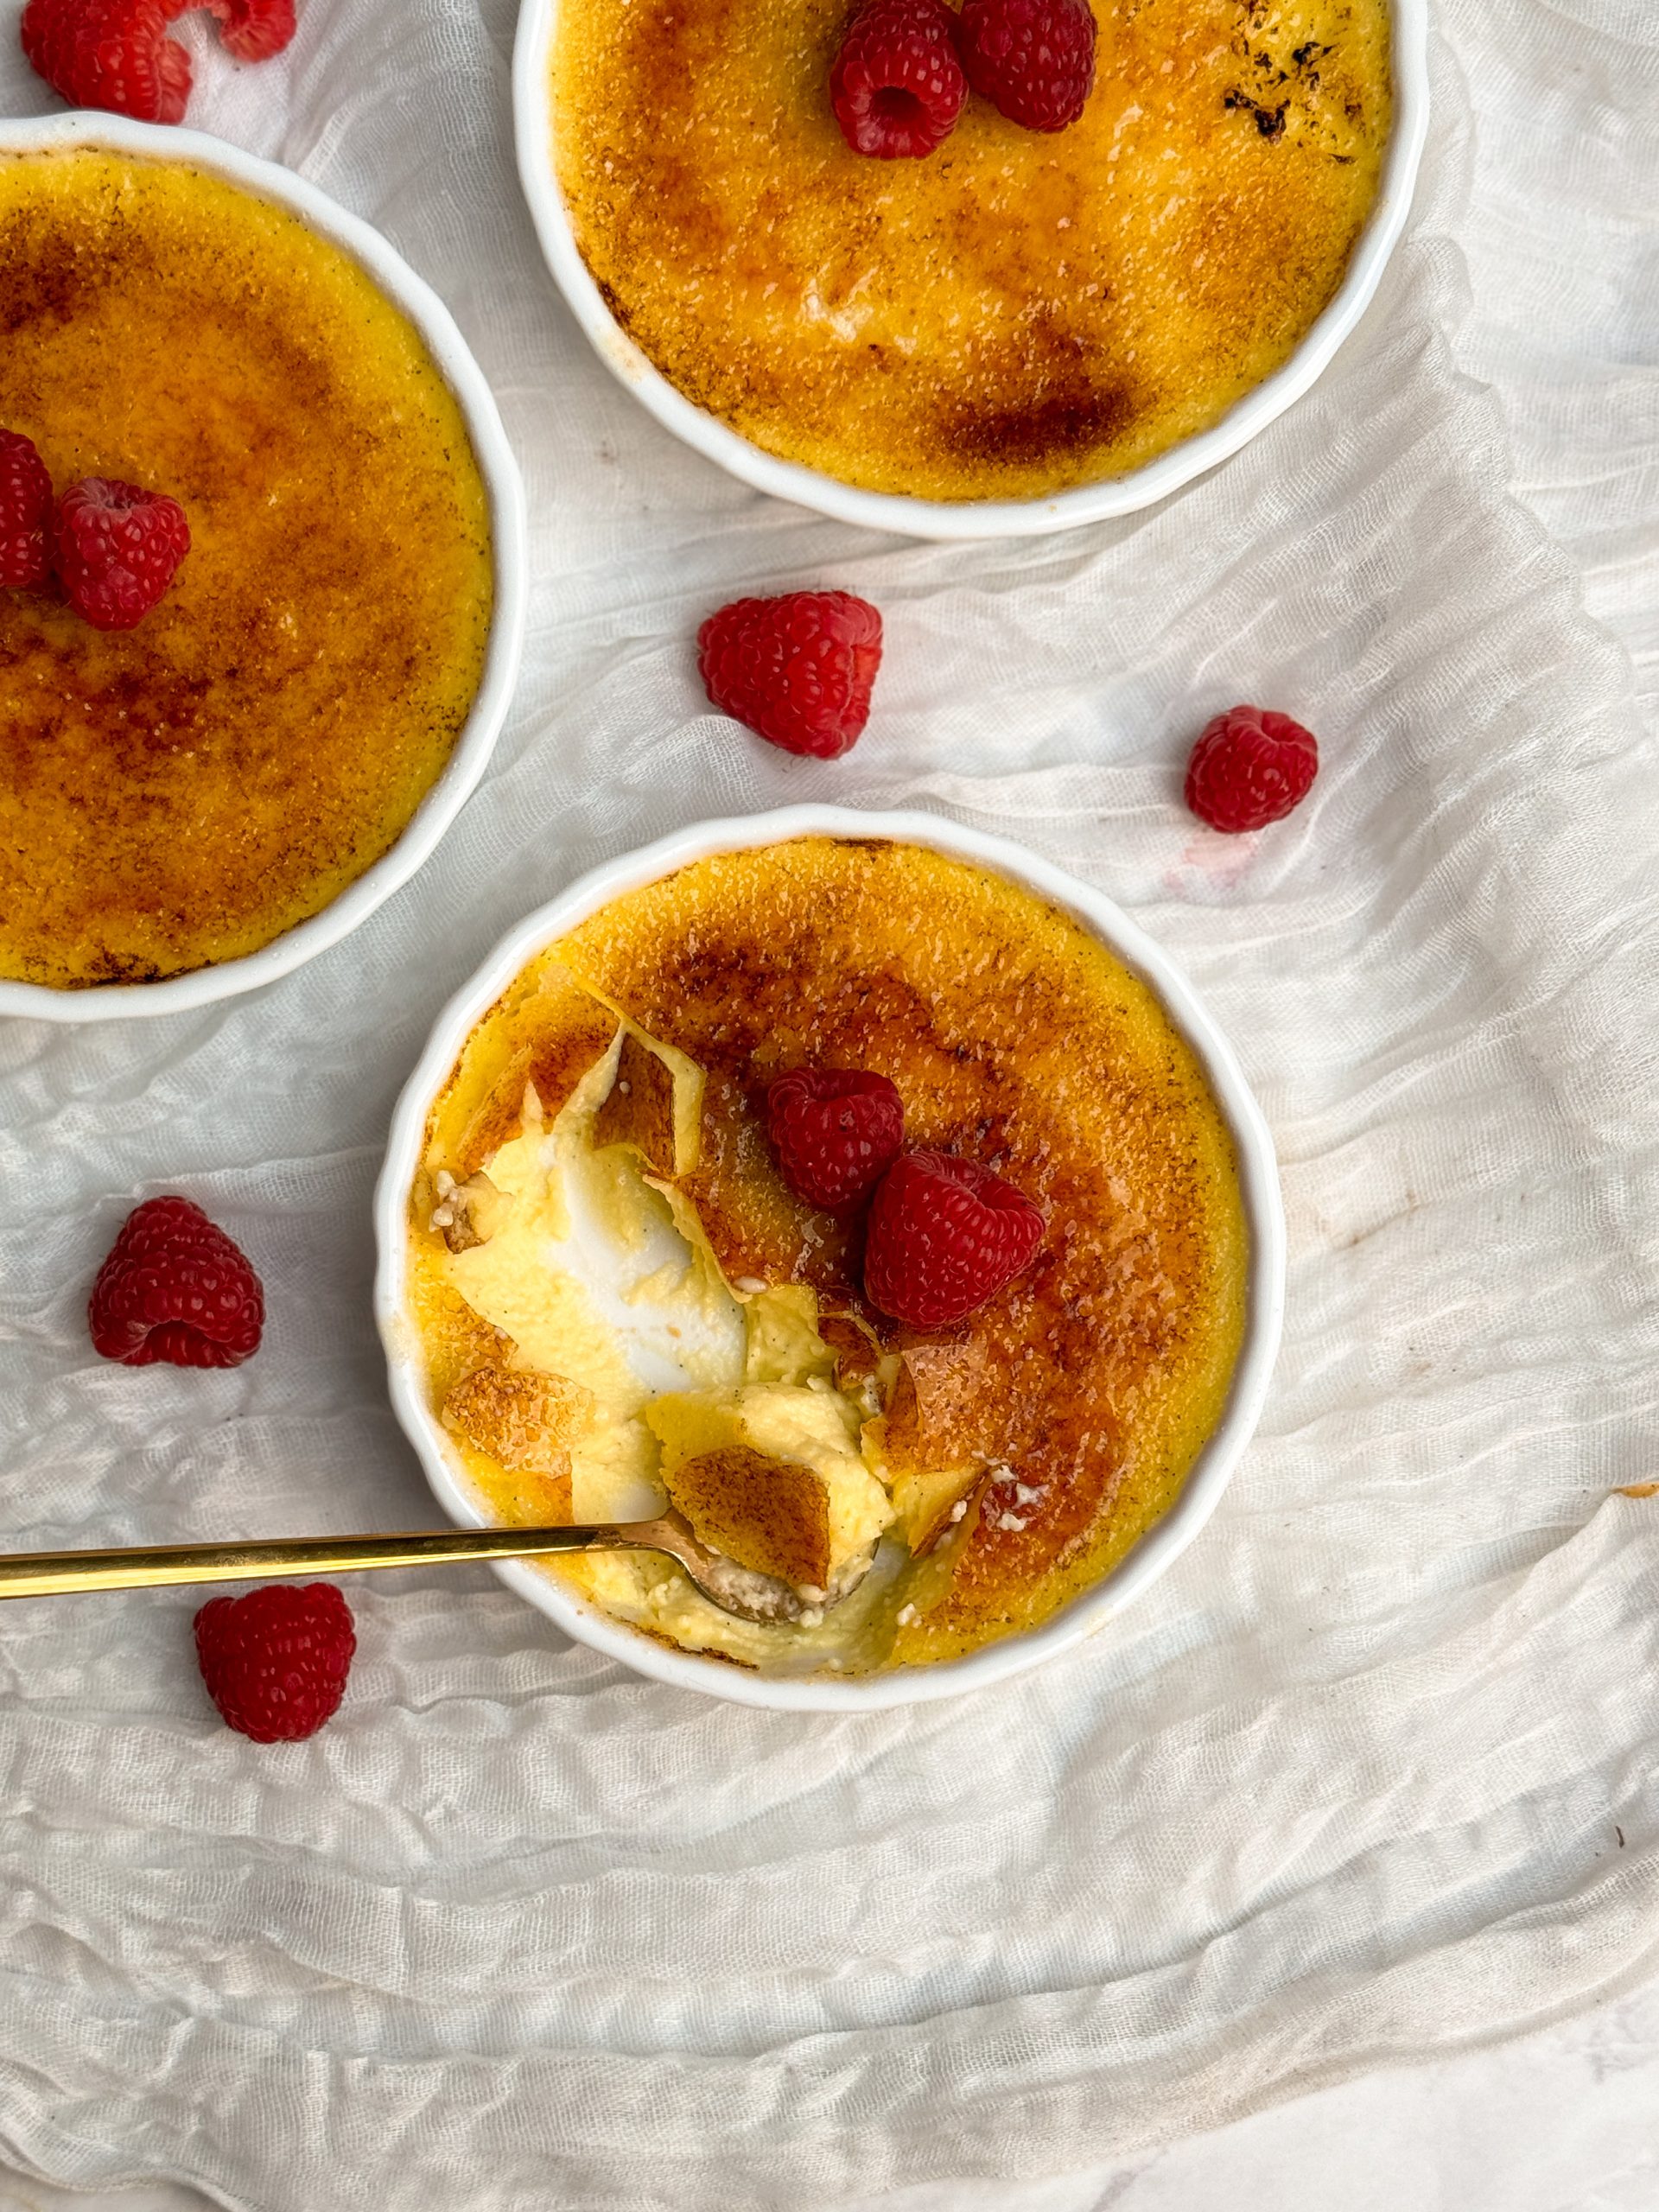 Overhead picture of creme brulee in a white ramekin with a golden crispy sugar coating, deocrated with 2 raspberries. a small golden spoon is taking out a bite showing the thin crispy coating and silky interior. more of the creme brulee is eaten and 2 more are seen on the side